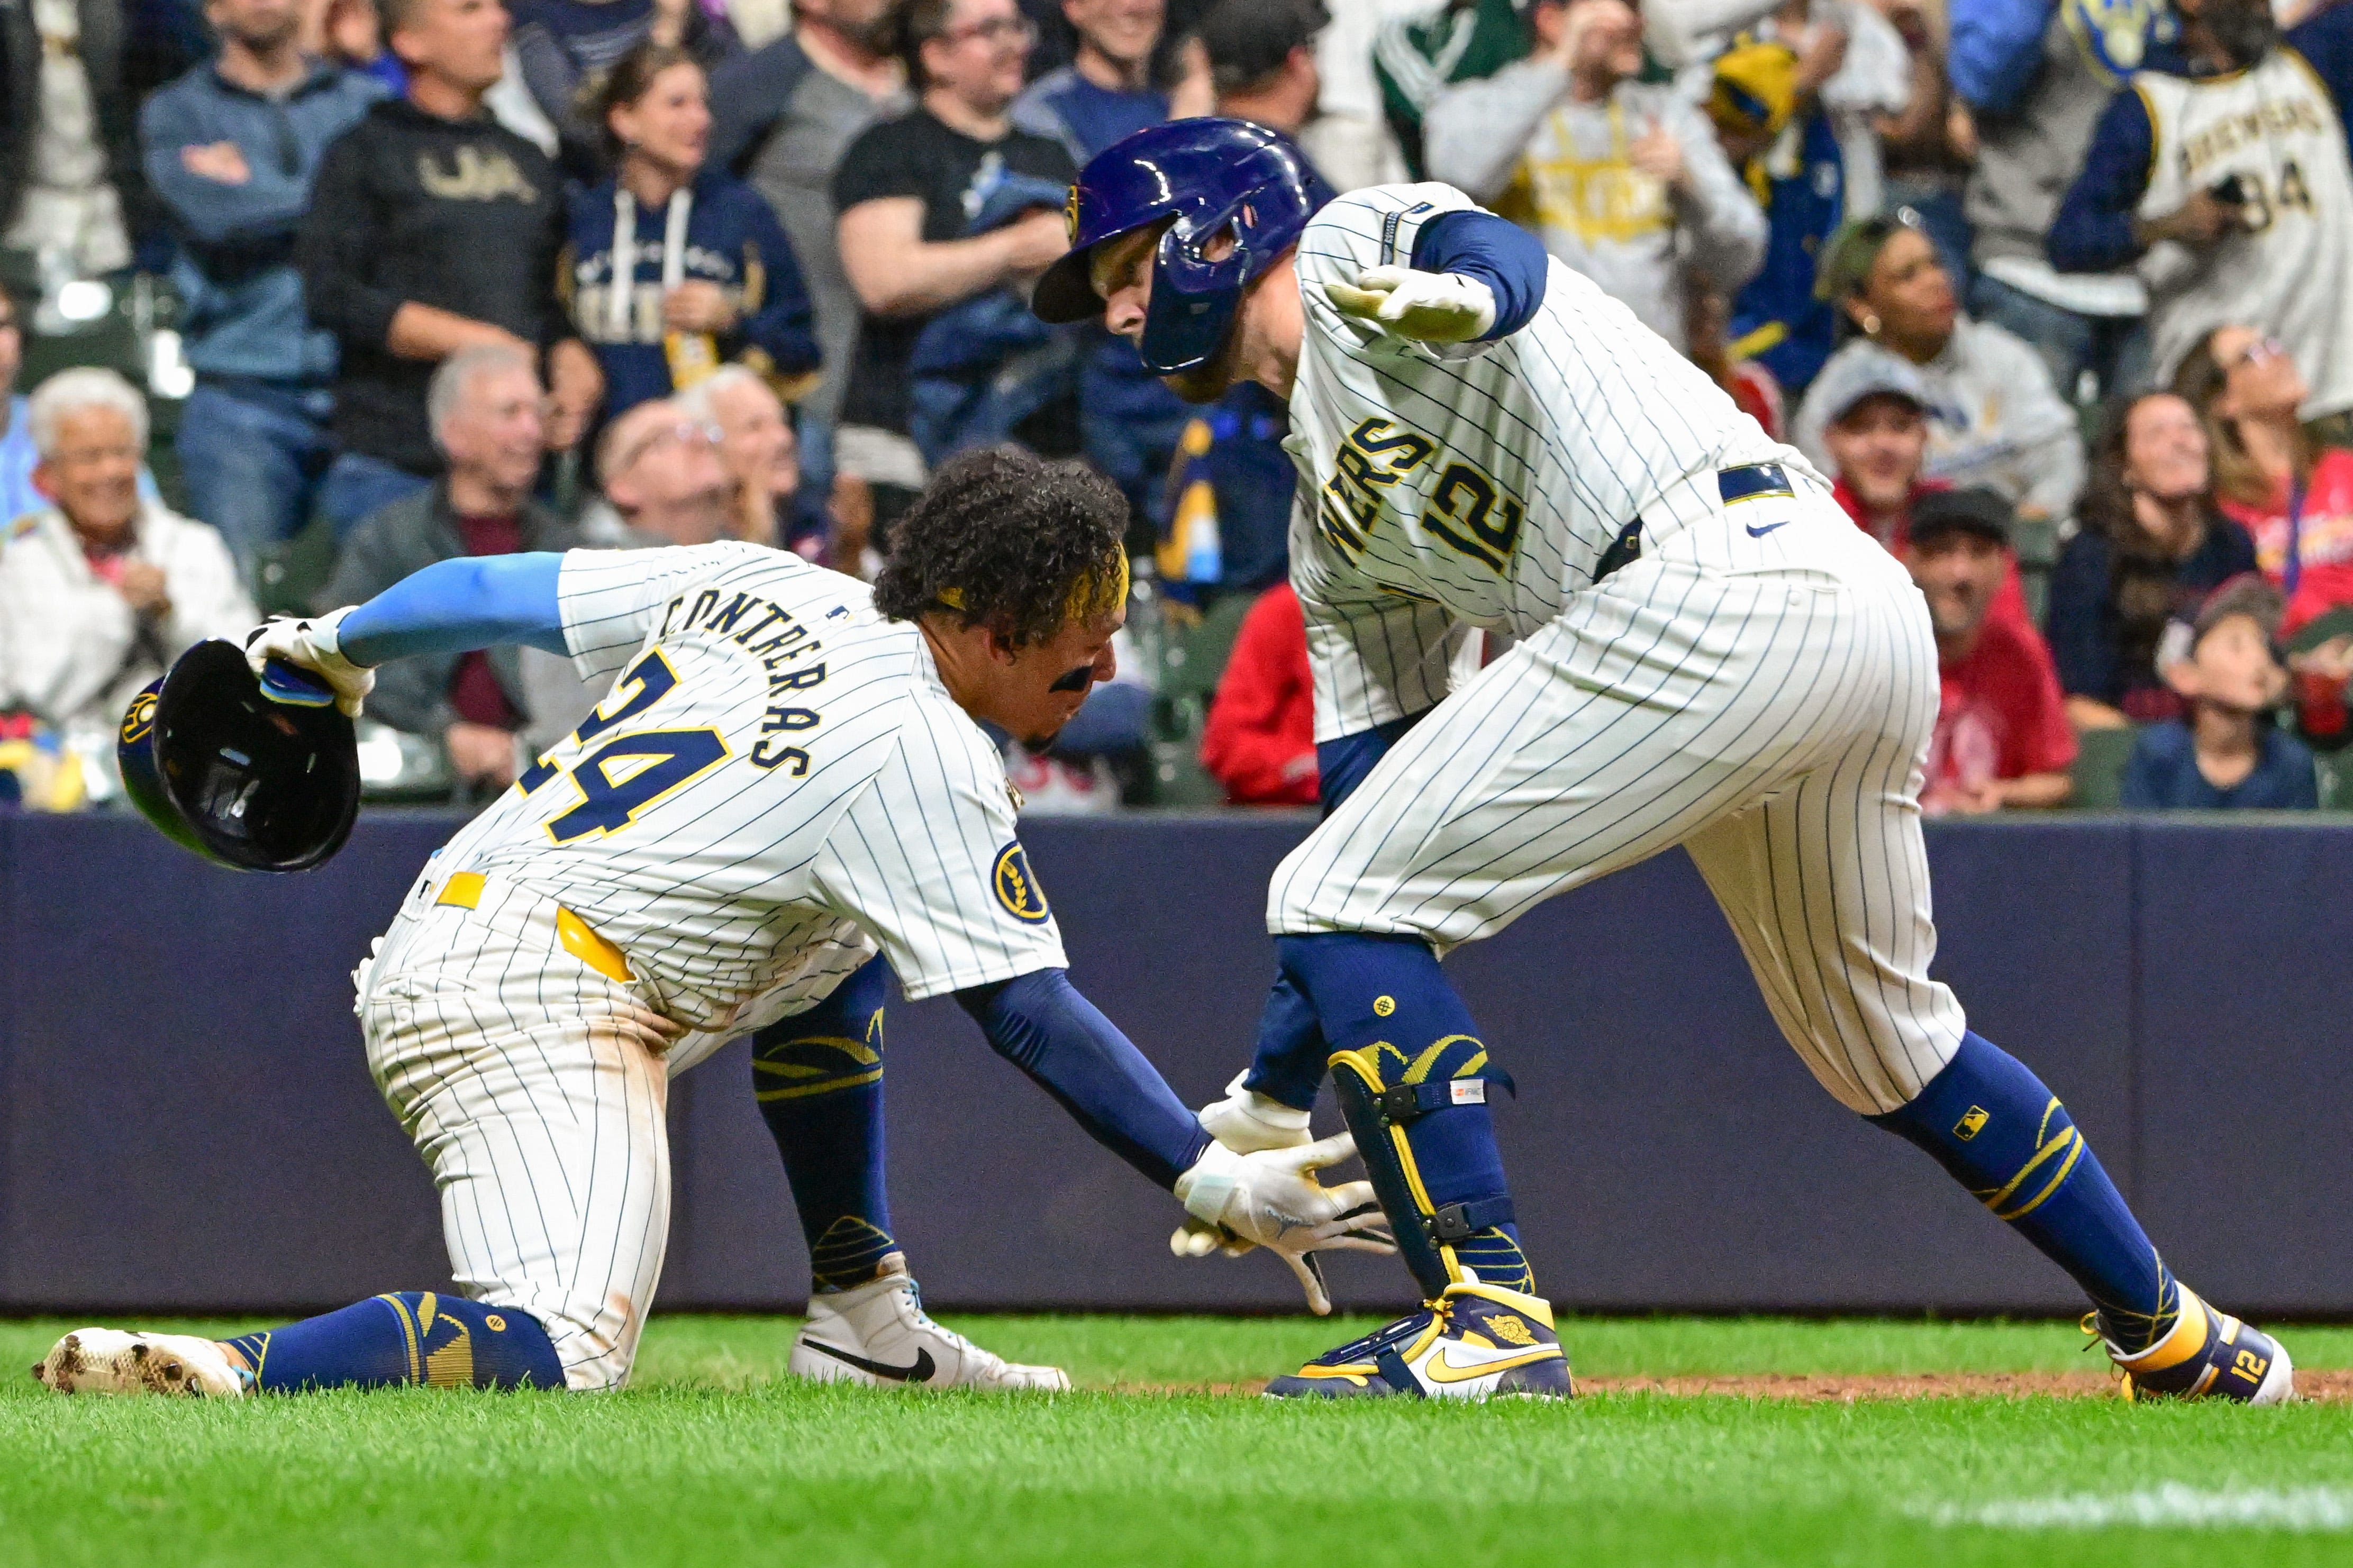 Brewers 5, Cardinals 3: Make it eight straight wins for Milwaukee over St. Louis